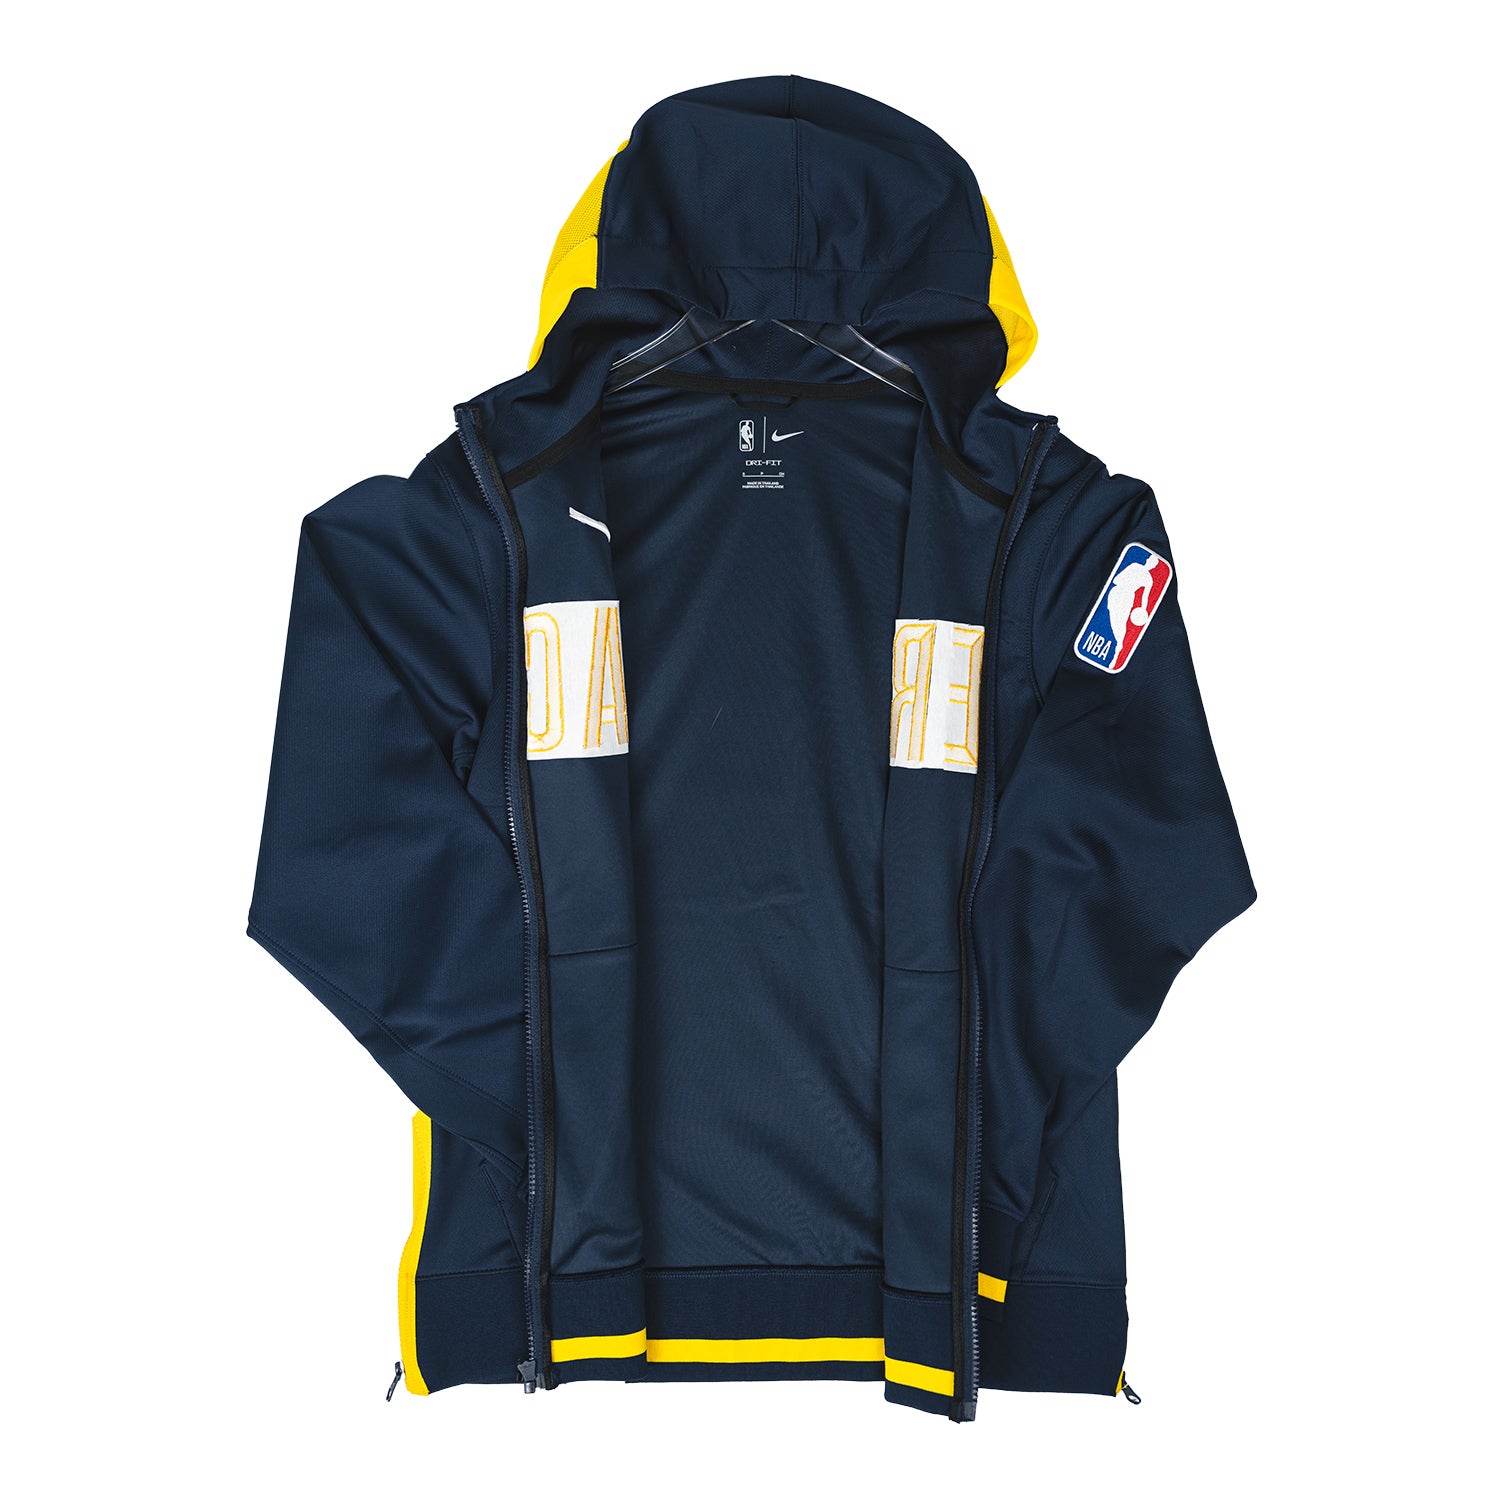 Golden State Warriors Nike Youth Showtime Performance Full-Zip